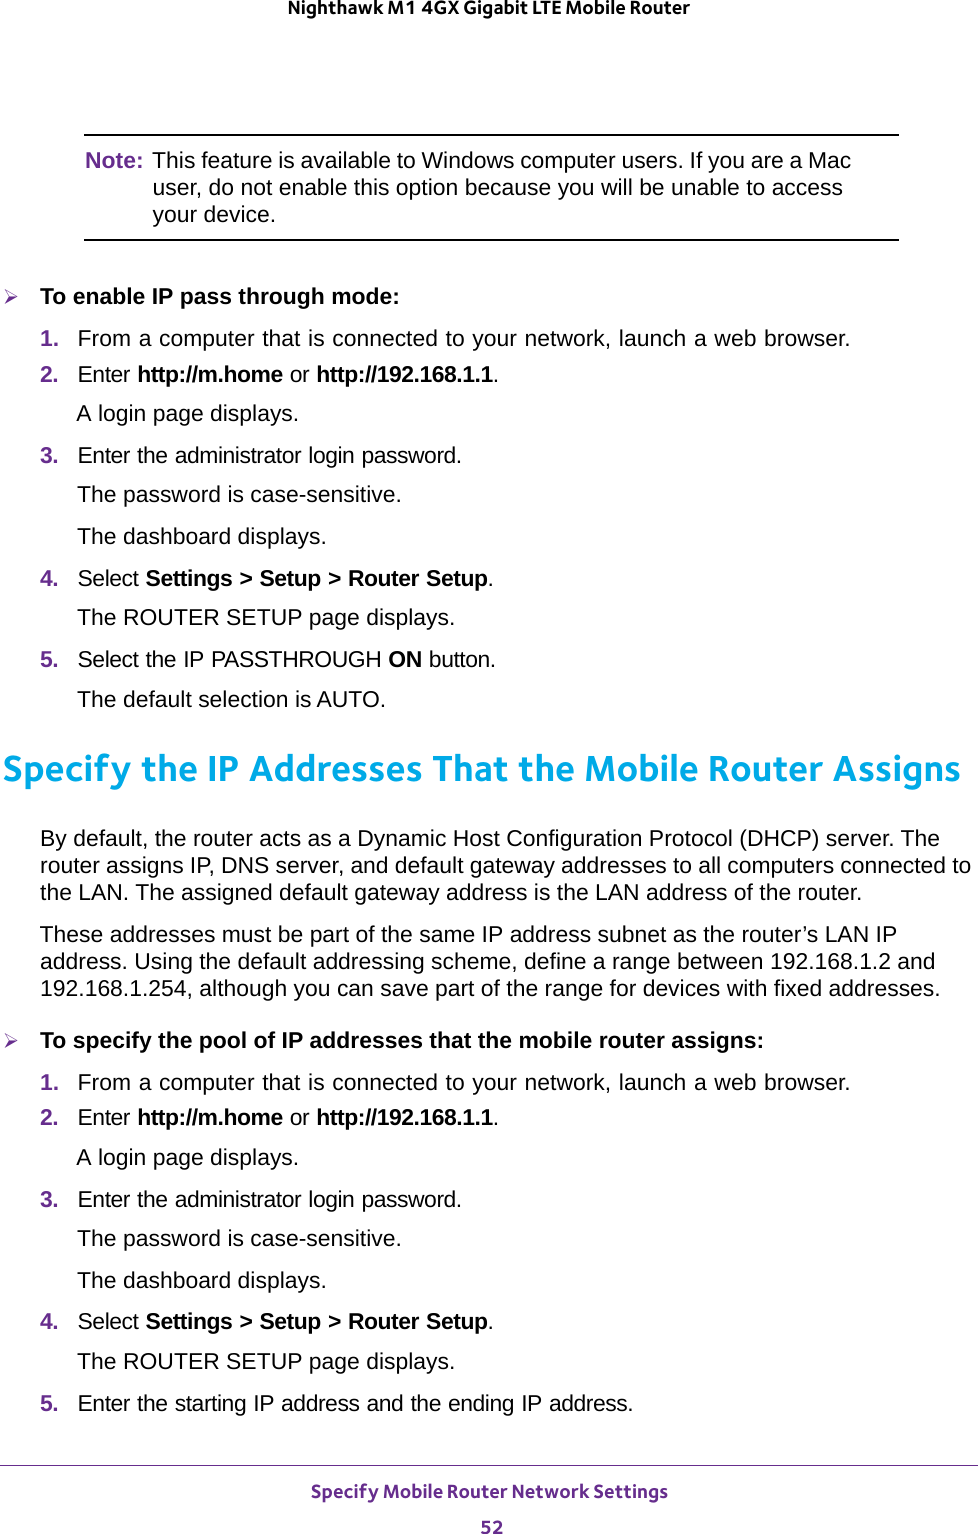 Specify Mobile Router Network Settings 52Nighthawk M1 4GX Gigabit LTE Mobile Router Note: This feature is available to Windows computer users. If you are a Mac user, do not enable this option because you will be unable to access your device.To enable IP pass through mode:1.  From a computer that is connected to your network, launch a web browser.2.  Enter http://m.home or http://192.168.1.1.A login page displays.3.  Enter the administrator login password.The password is case-sensitive.The dashboard displays.4.  Select Settings &gt; Setup &gt; Router Setup.The ROUTER SETUP page displays.5.  Select the IP PASSTHROUGH ON button.The default selection is AUTO. Specify the IP Addresses That the Mobile Router AssignsBy default, the router acts as a Dynamic Host Configuration Protocol (DHCP) server. The router assigns IP, DNS server, and default gateway addresses to all computers connected to the LAN. The assigned default gateway address is the LAN address of the router.These addresses must be part of the same IP address subnet as the router’s LAN IP address. Using the default addressing scheme, define a range between 192.168.1.2 and 192.168.1.254, although you can save part of the range for devices with fixed addresses.To specify the pool of IP addresses that the mobile router assigns:1.  From a computer that is connected to your network, launch a web browser.2.  Enter http://m.home or http://192.168.1.1.A login page displays.3.  Enter the administrator login password.The password is case-sensitive.The dashboard displays.4.  Select Settings &gt; Setup &gt; Router Setup.The ROUTER SETUP page displays.5.  Enter the starting IP address and the ending IP address.